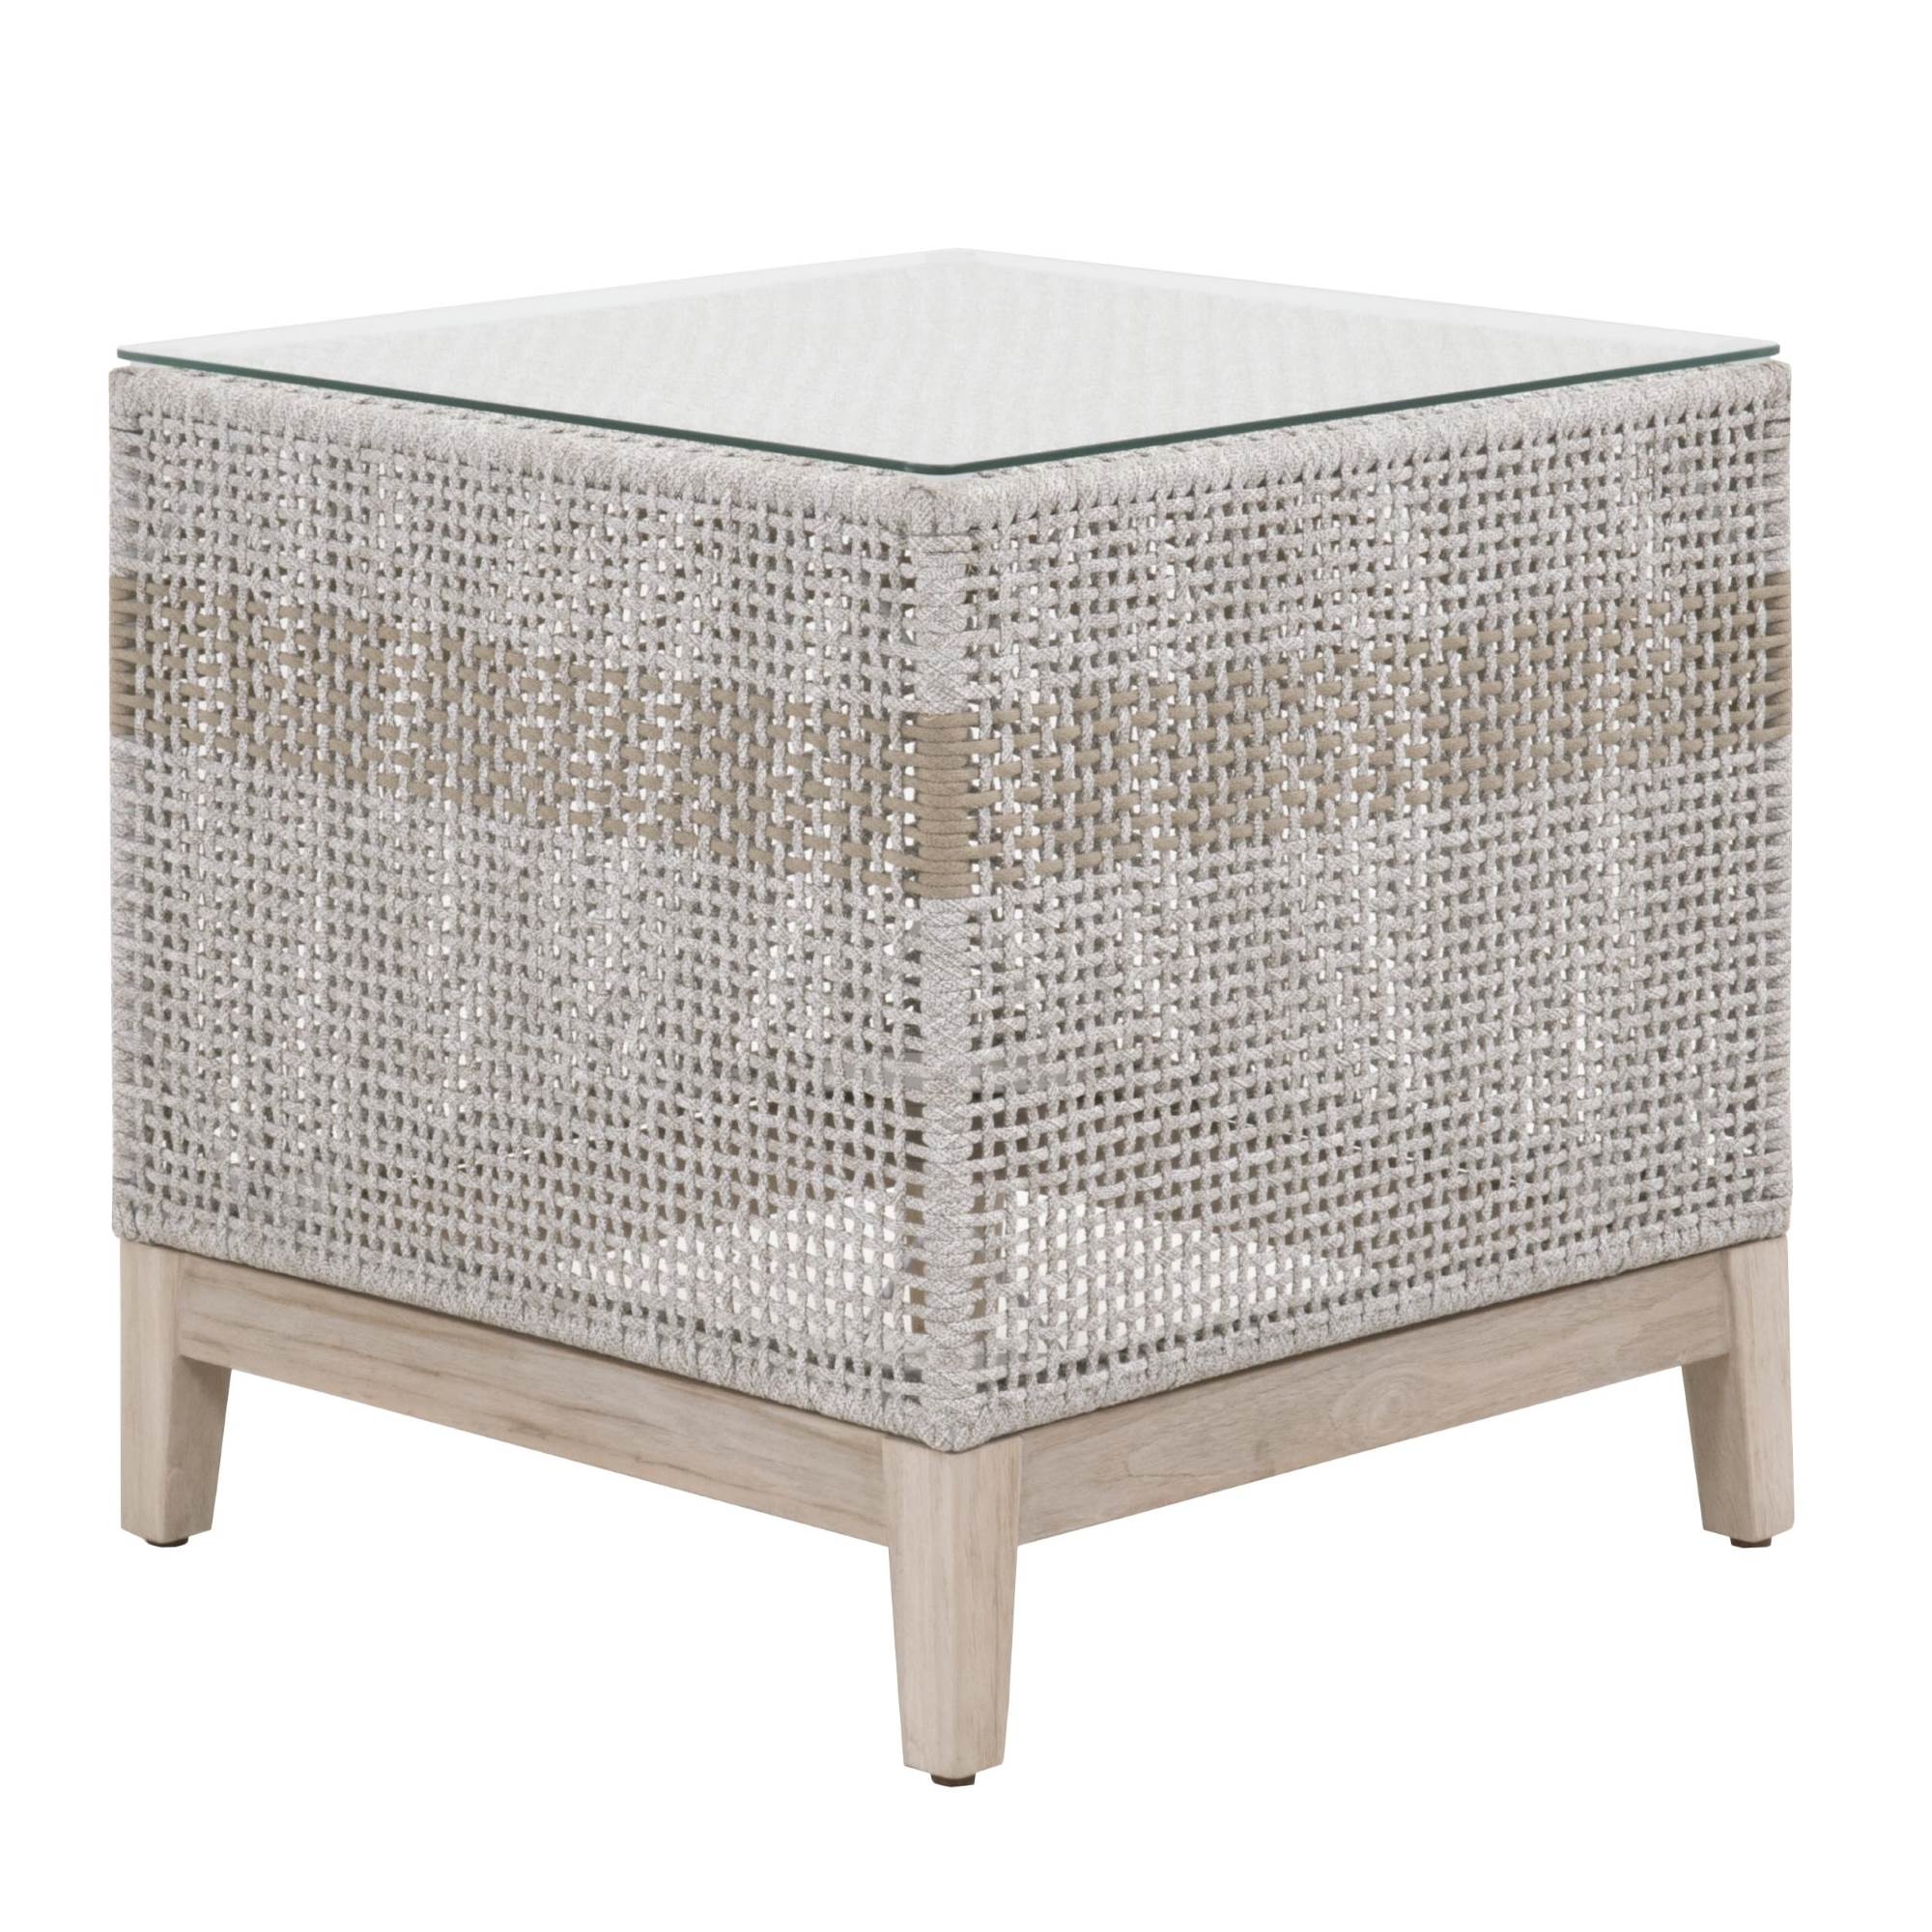 Tapestry Outdoor End Table - Image 2